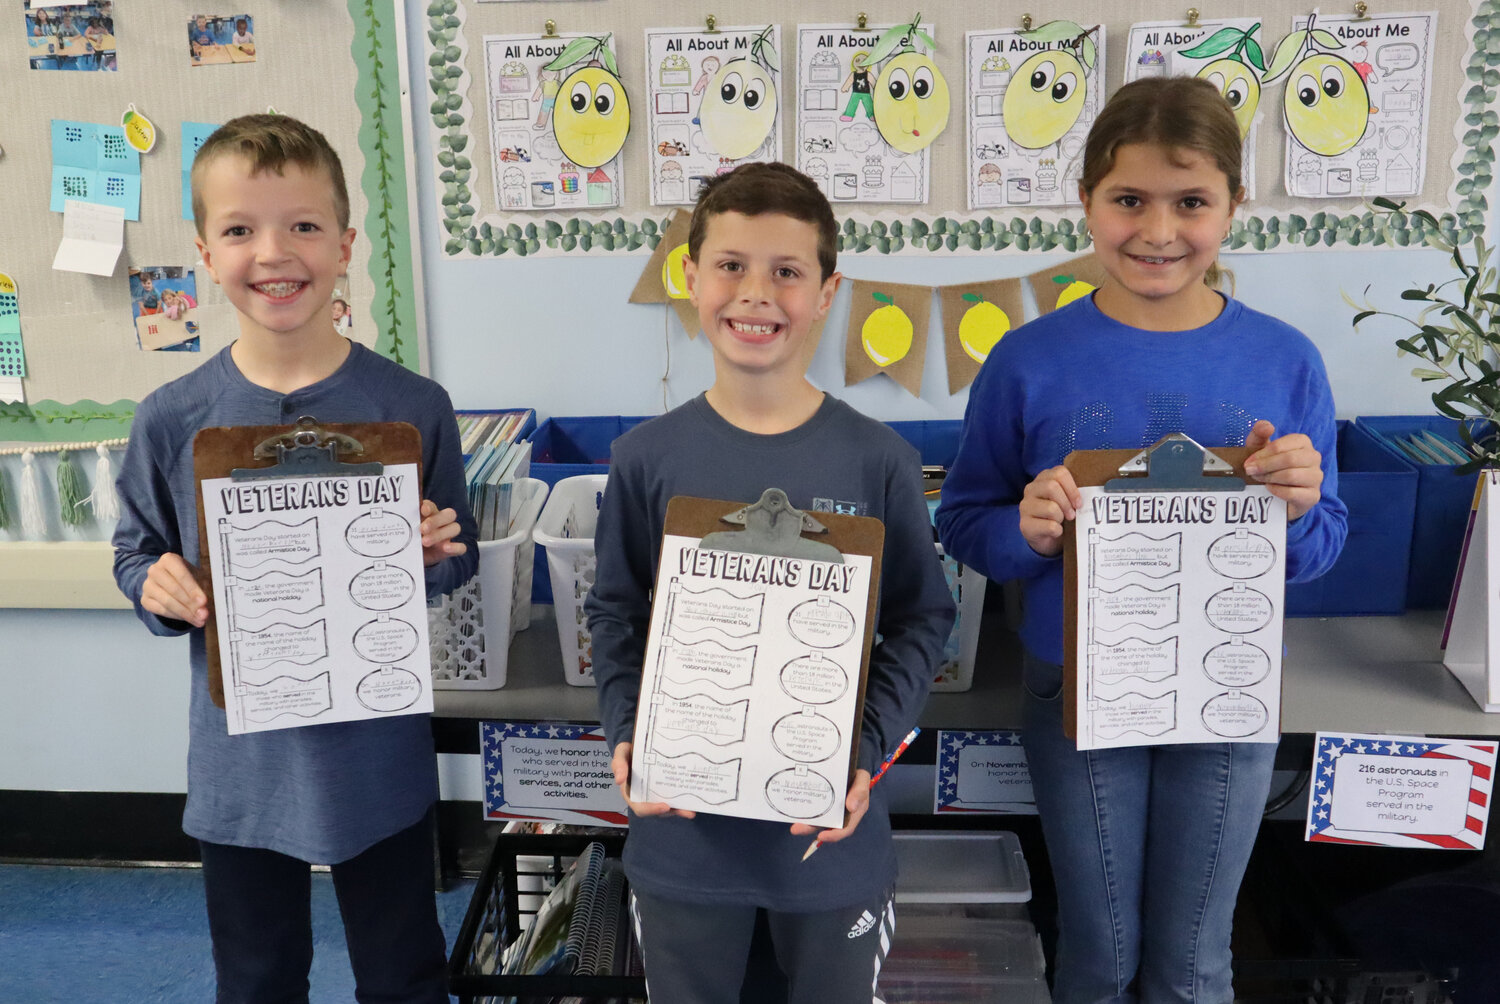 Lee Road third graders Dylan Kemnah, left, John Maddalena and Scarlett Cippoletti searched for various facts about Veterans Day.